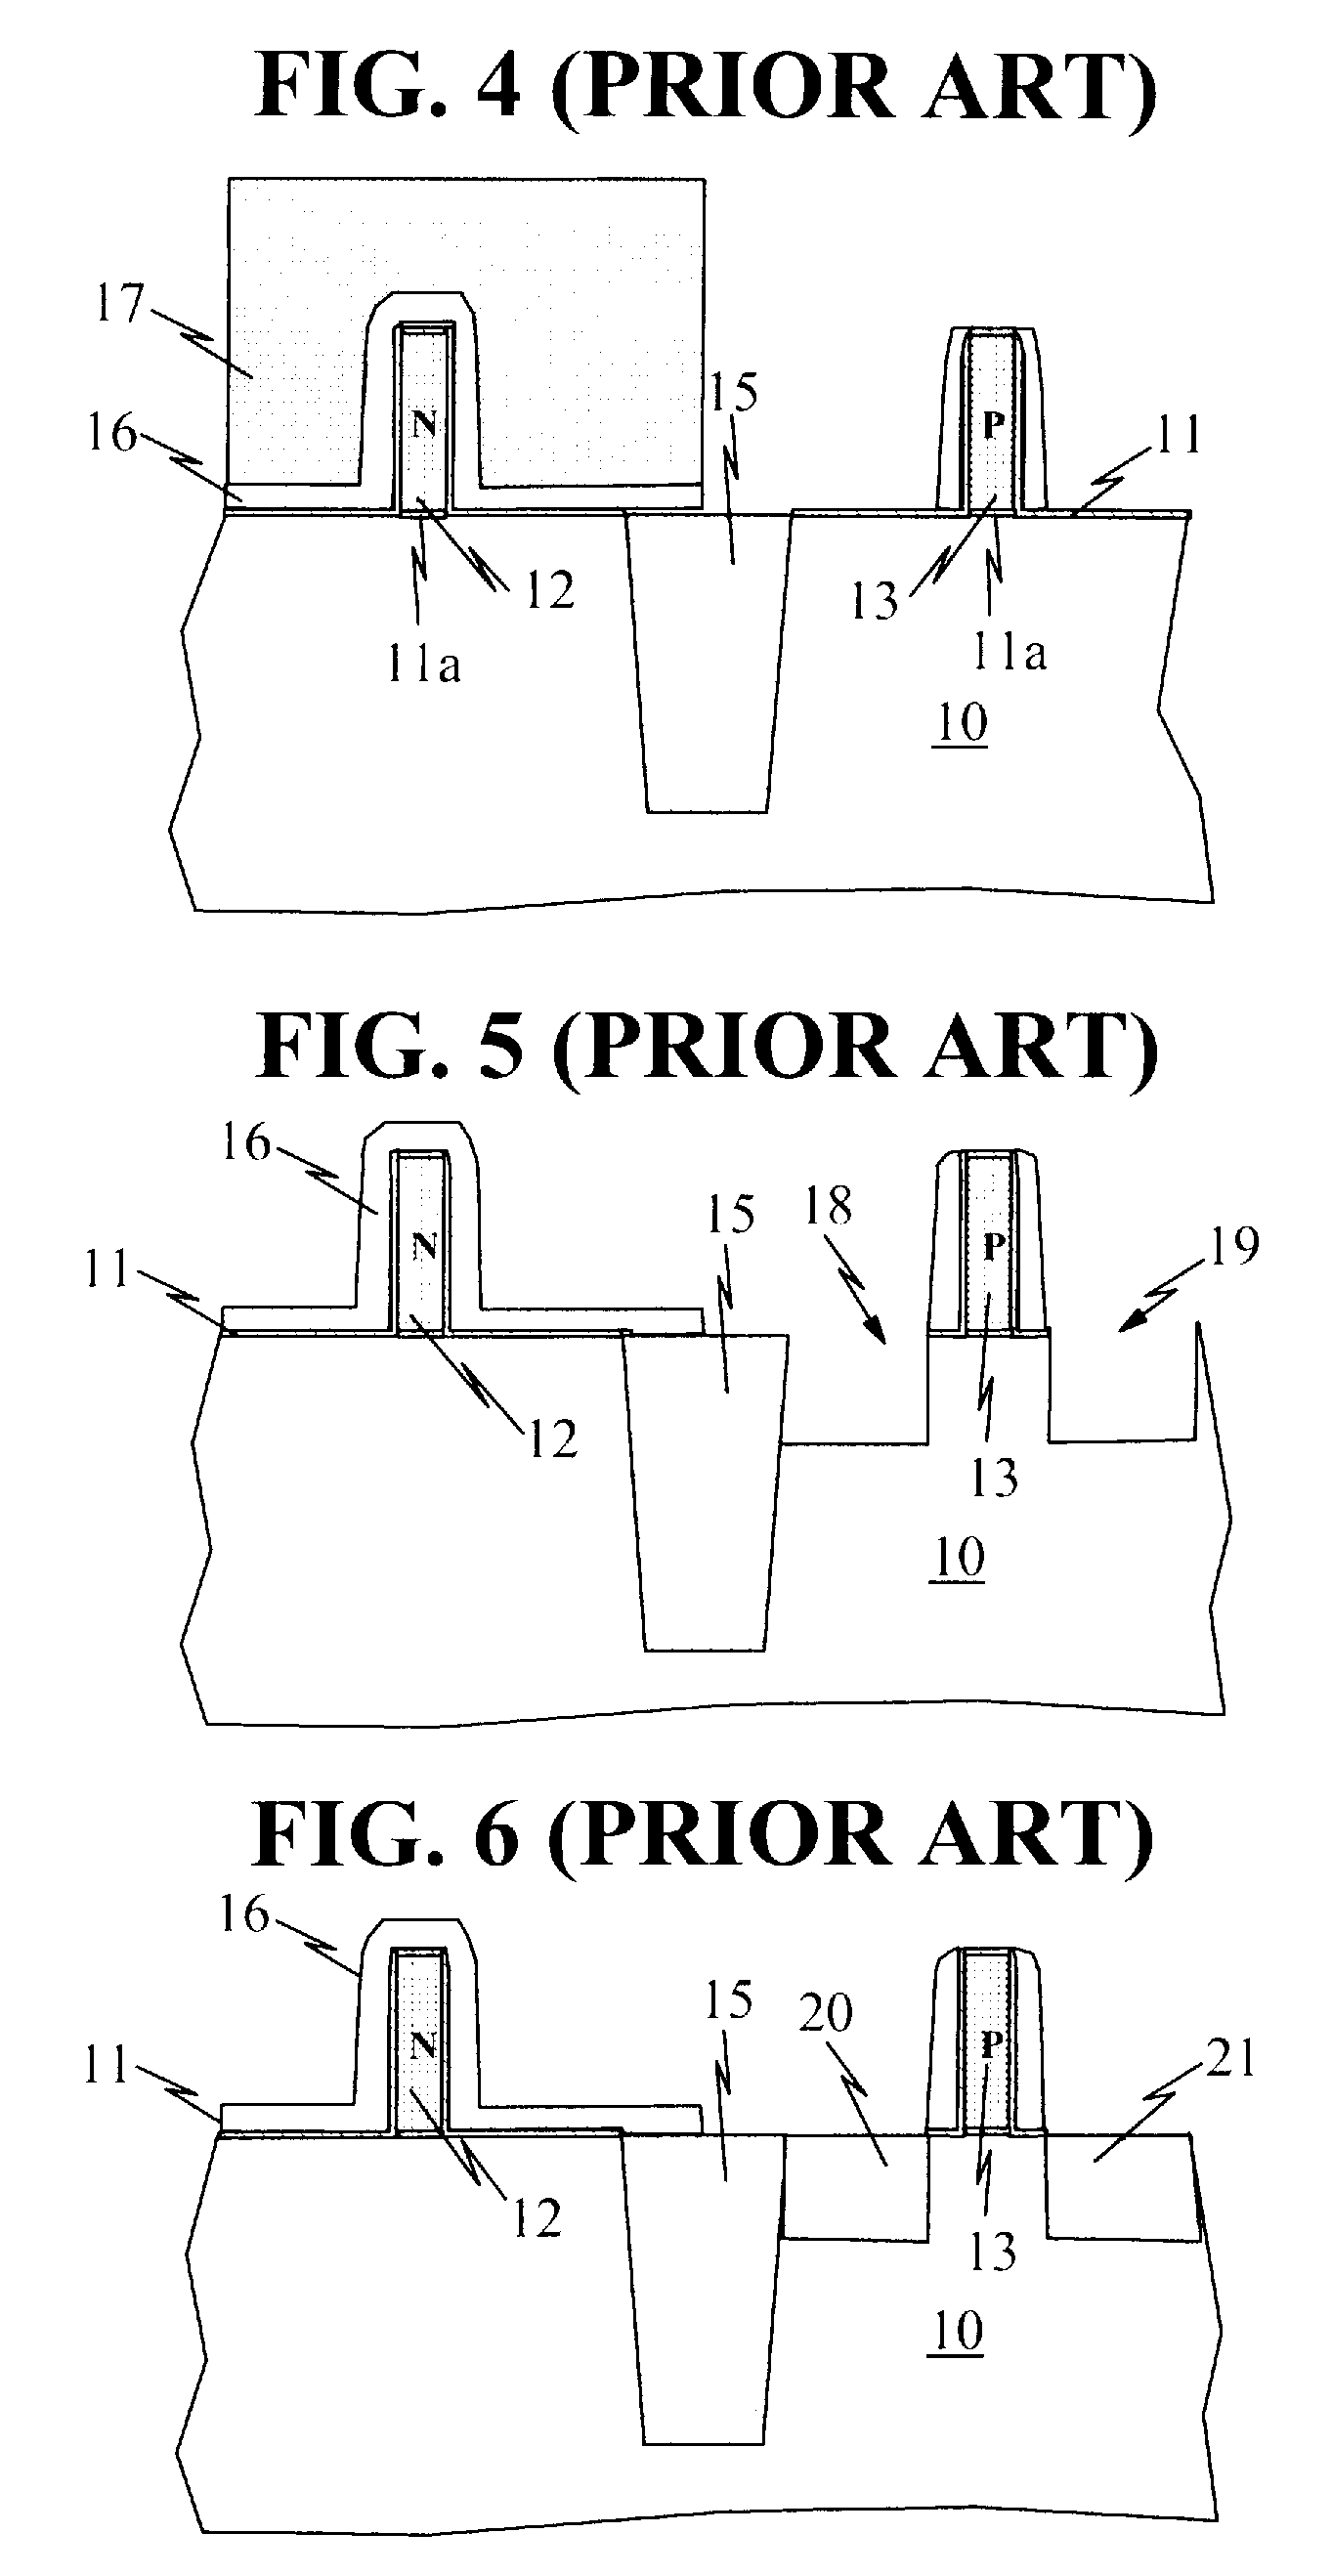 METHOD OF DOPING FIELD-EFFECT-TRANSISTORS (FETs) WITH REDUCED STRESS/STRAIN RELAXATION AND RESULTING FET DEVICES